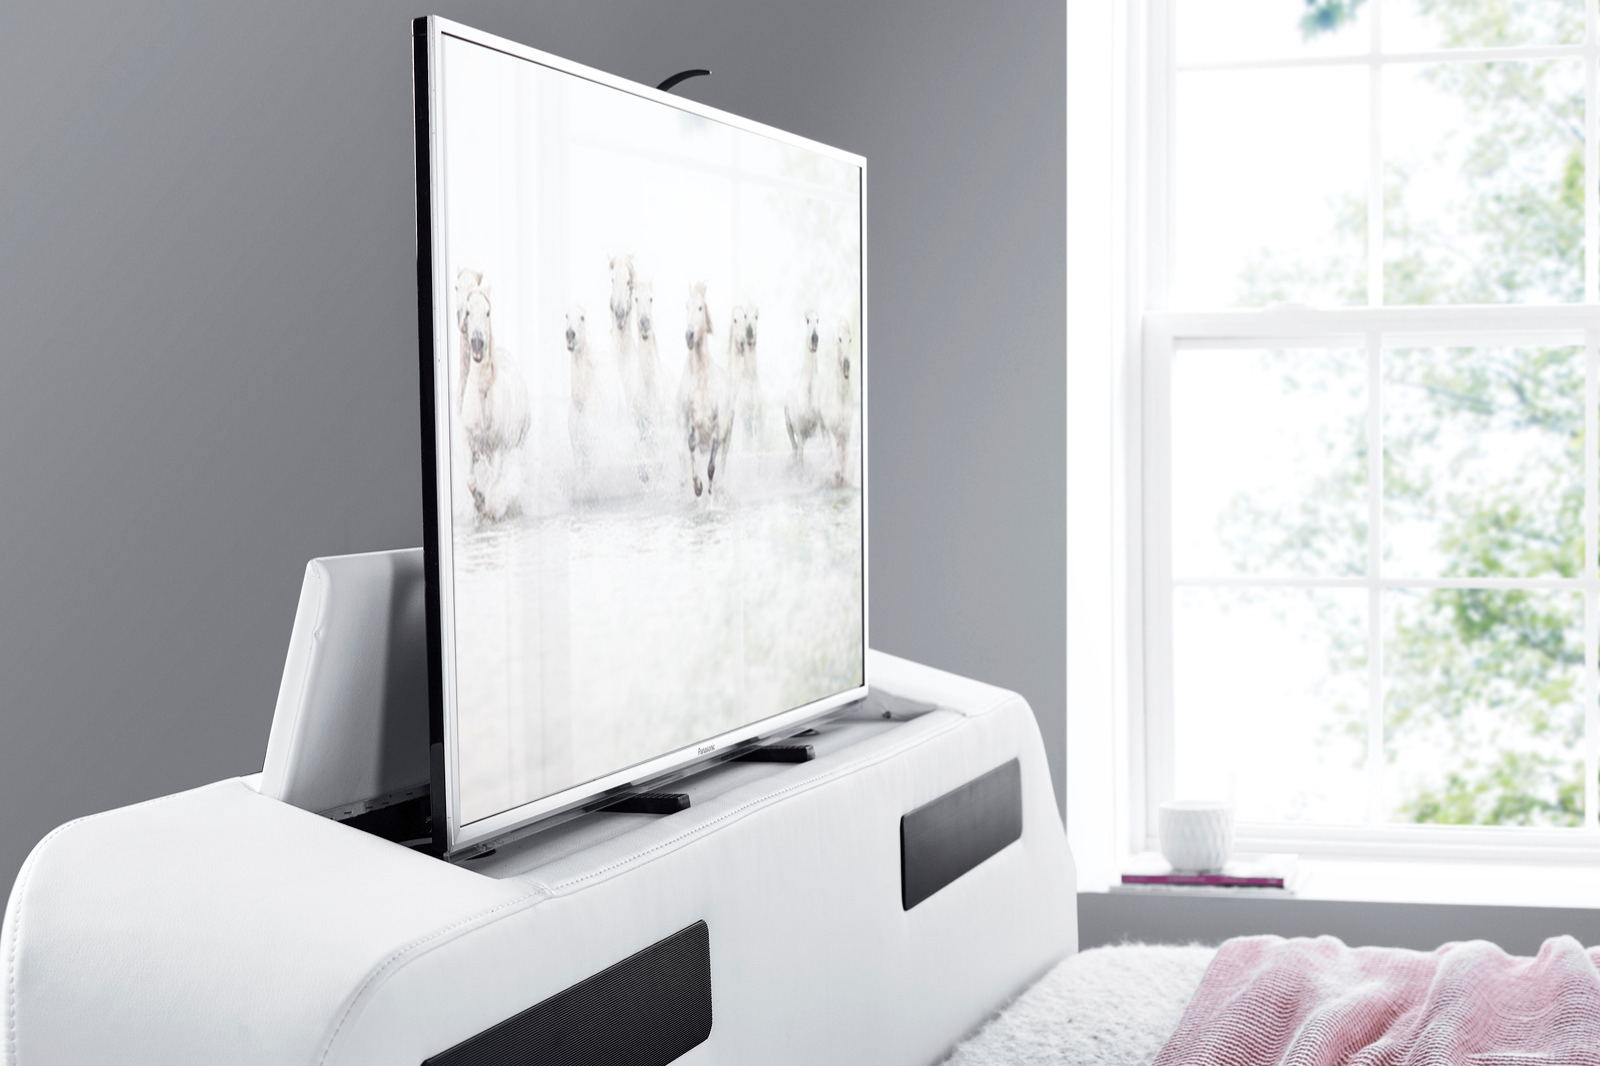 Is a TV Bed the Ultimate Indulgence?